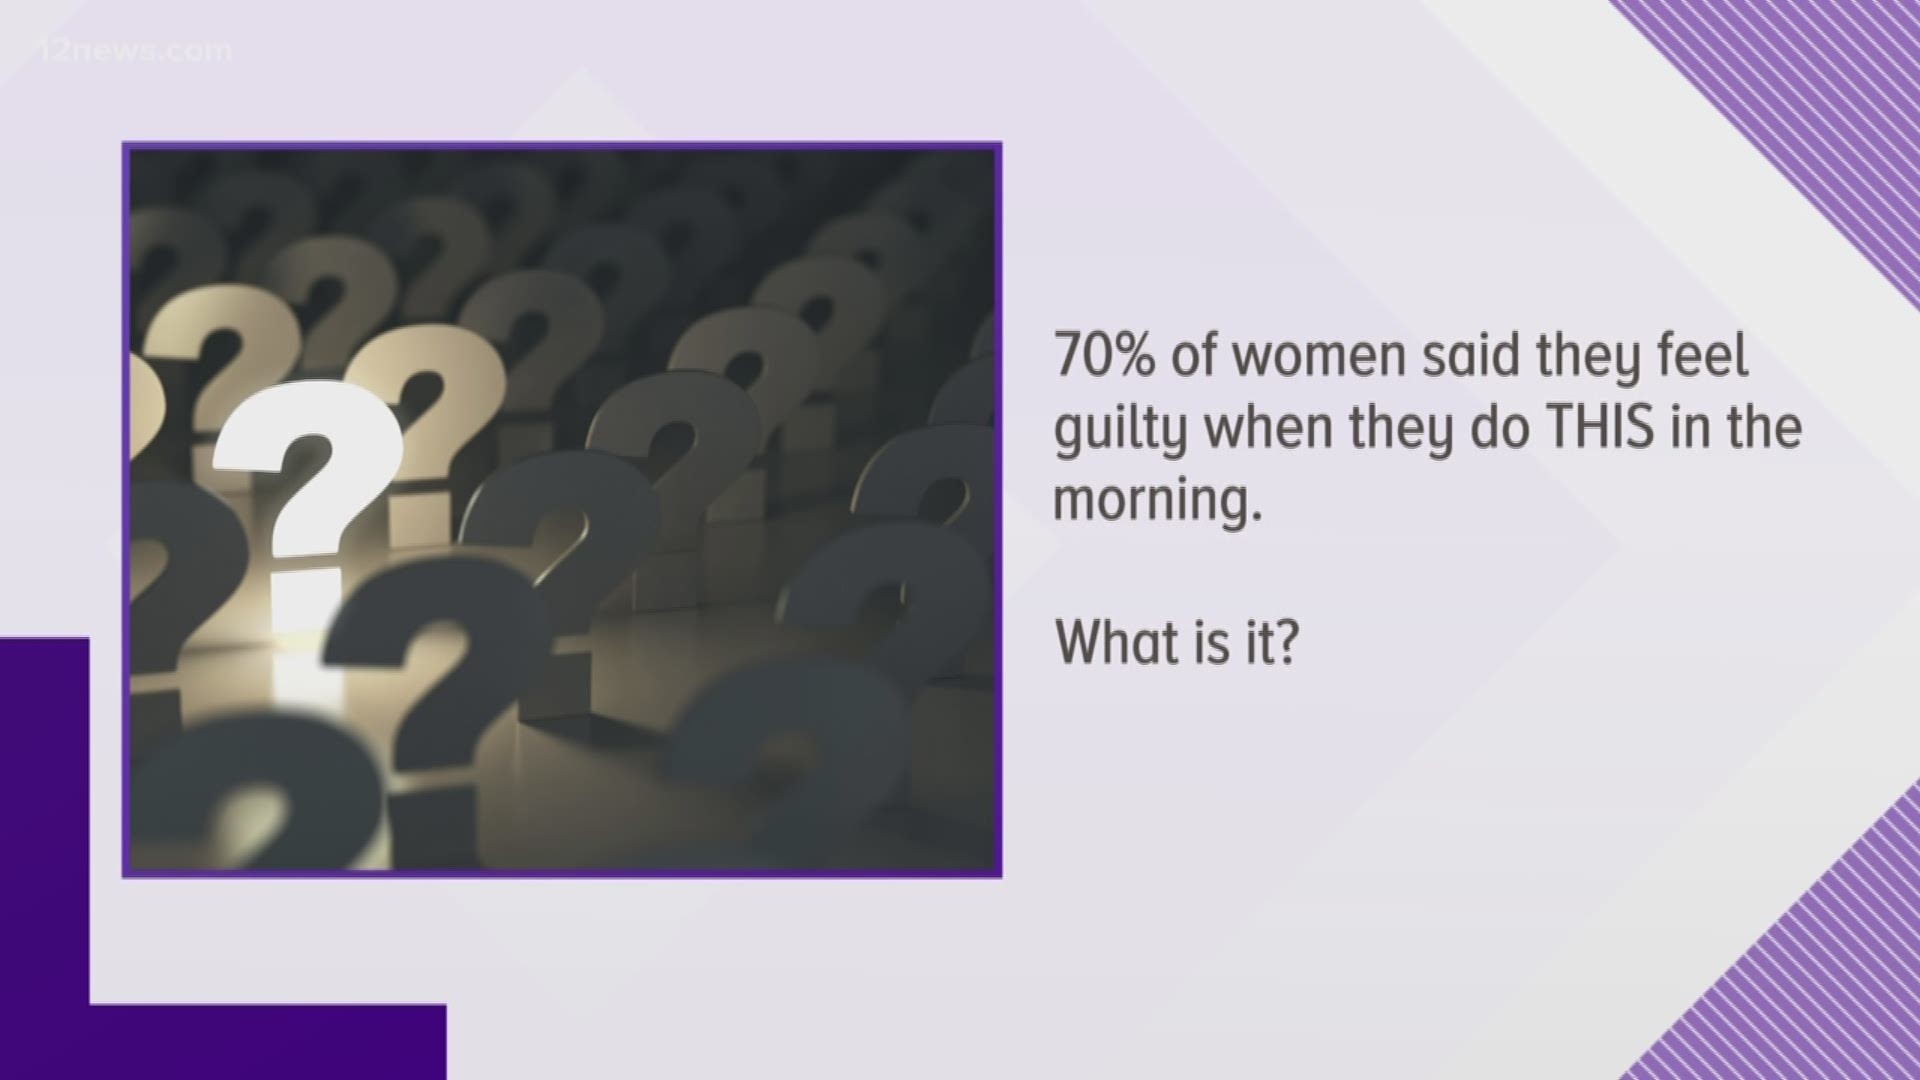 70 percent of women say they feel guilty when they do this in the morning. What is it?